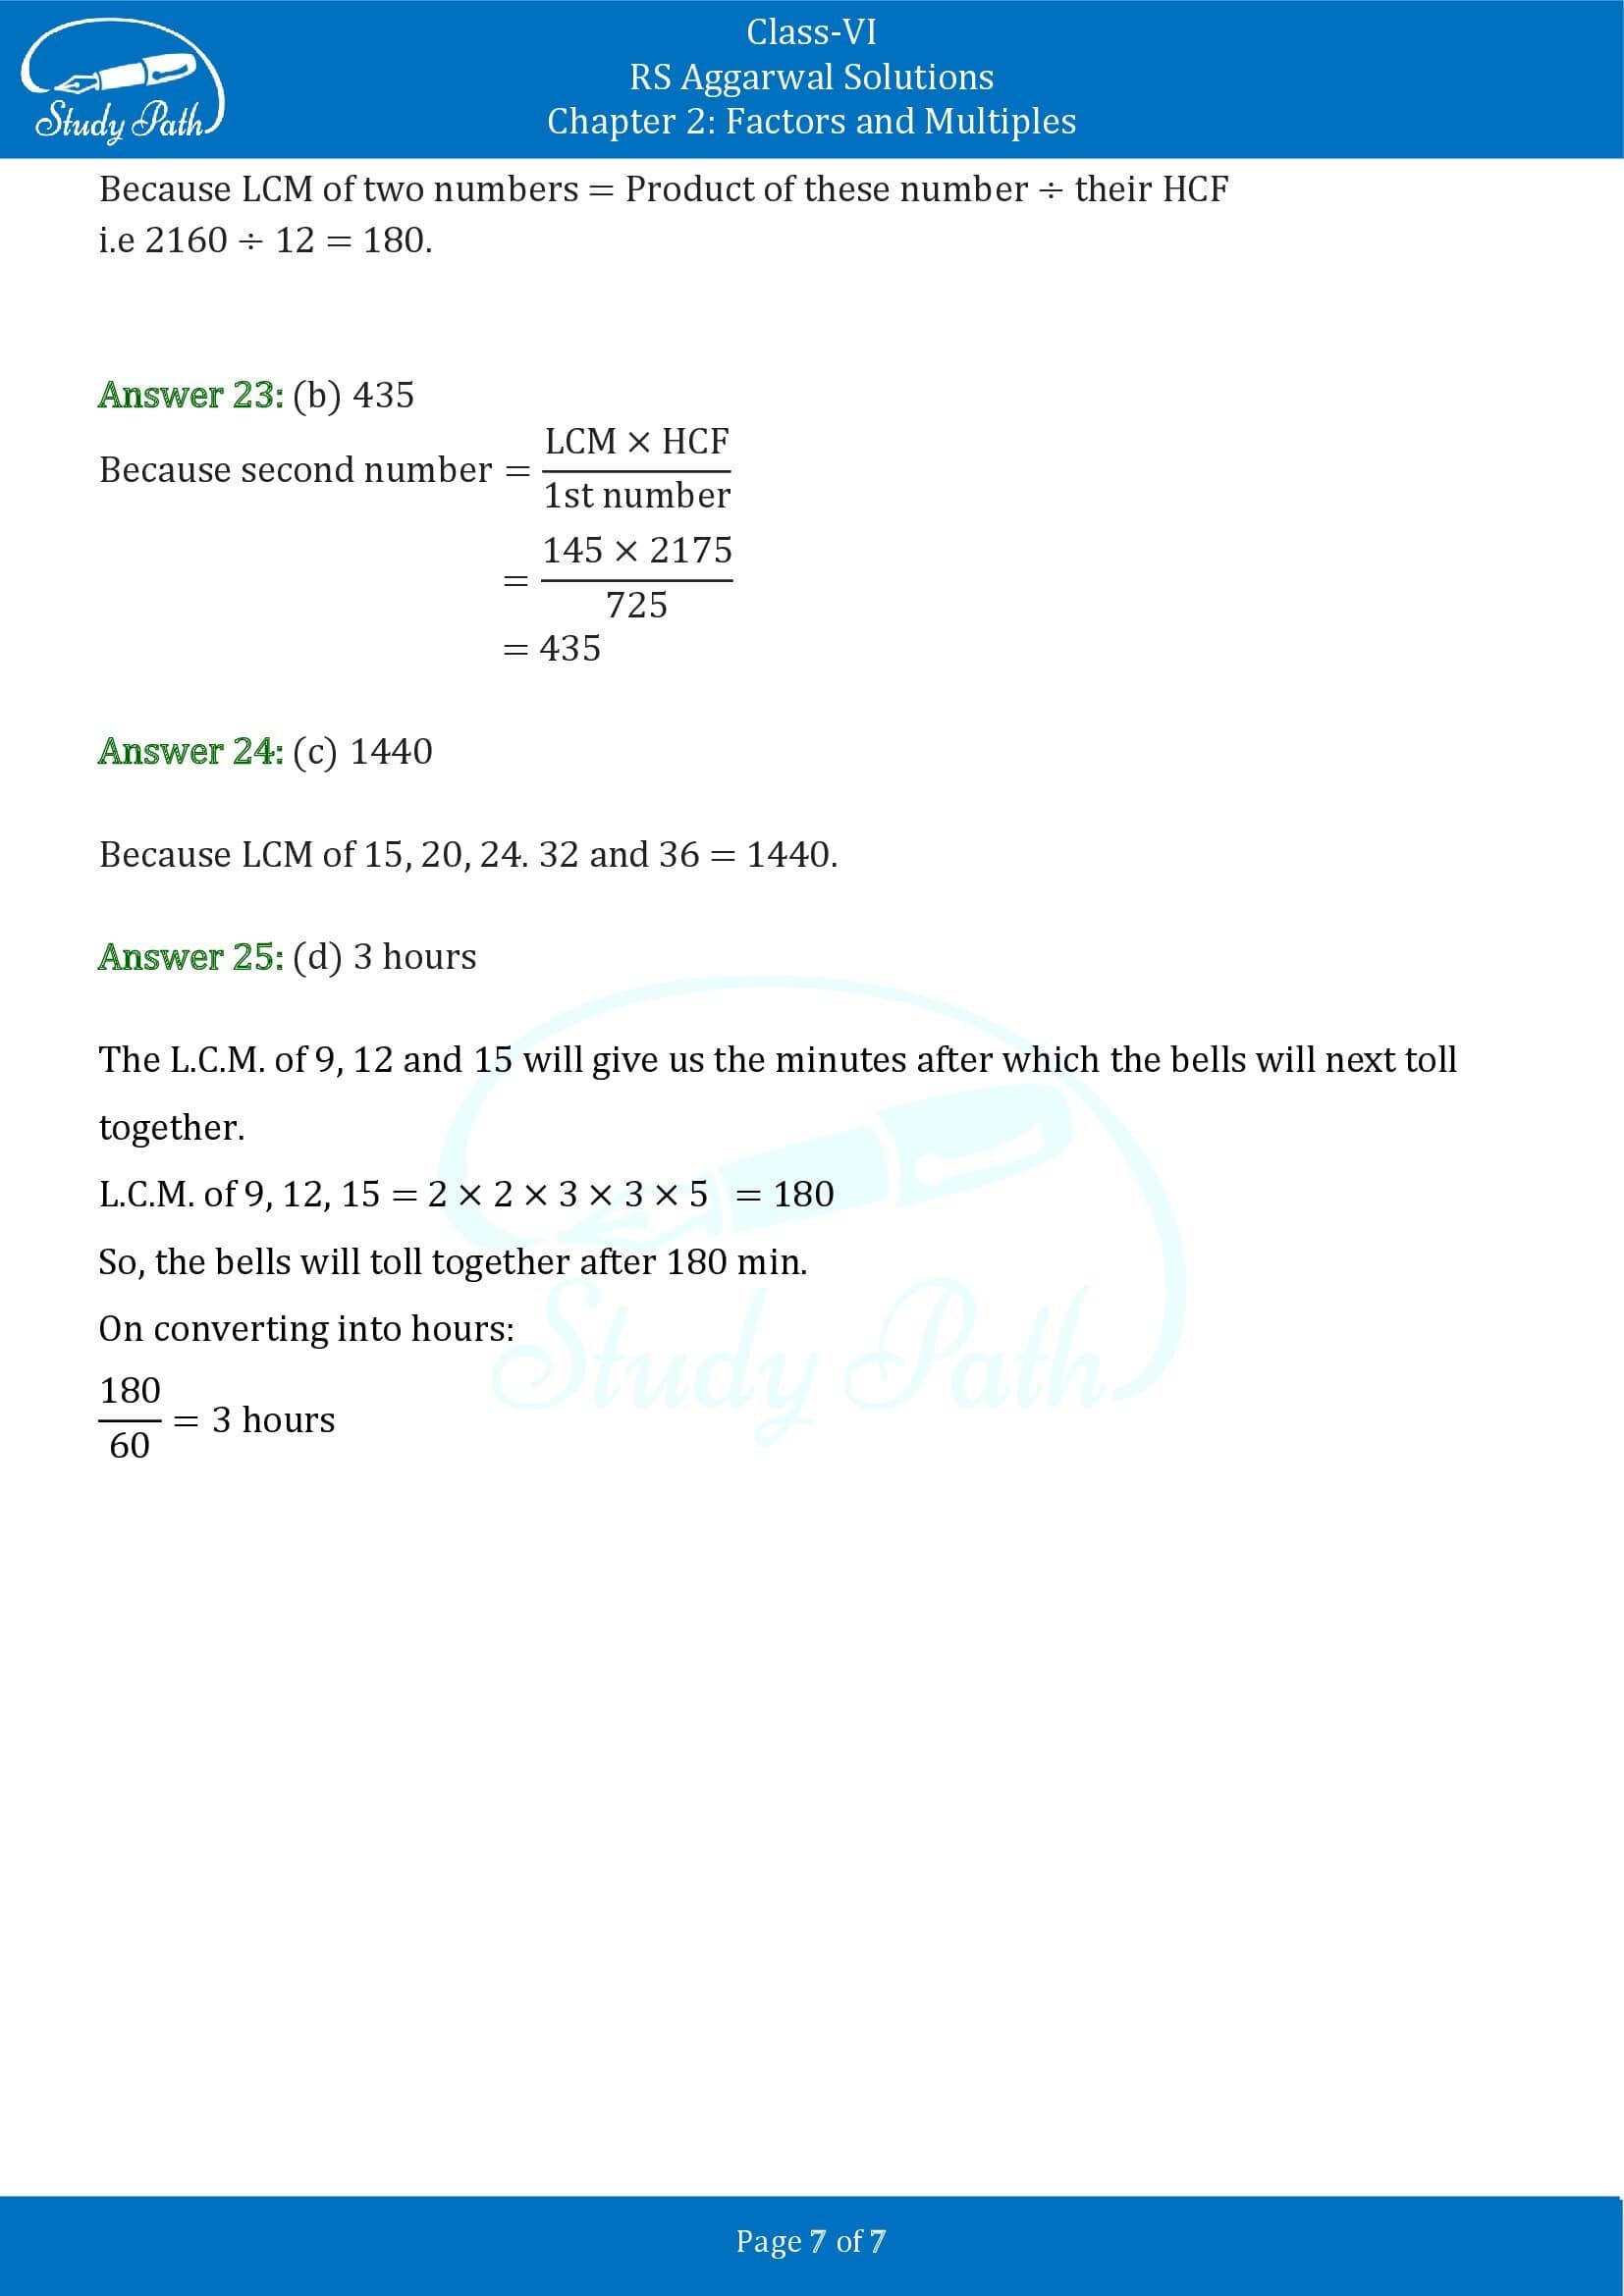 RS Aggarwal Solutions Class 6 Chapter 2 Factors and Multiples Exercise 2F MCQ 00007